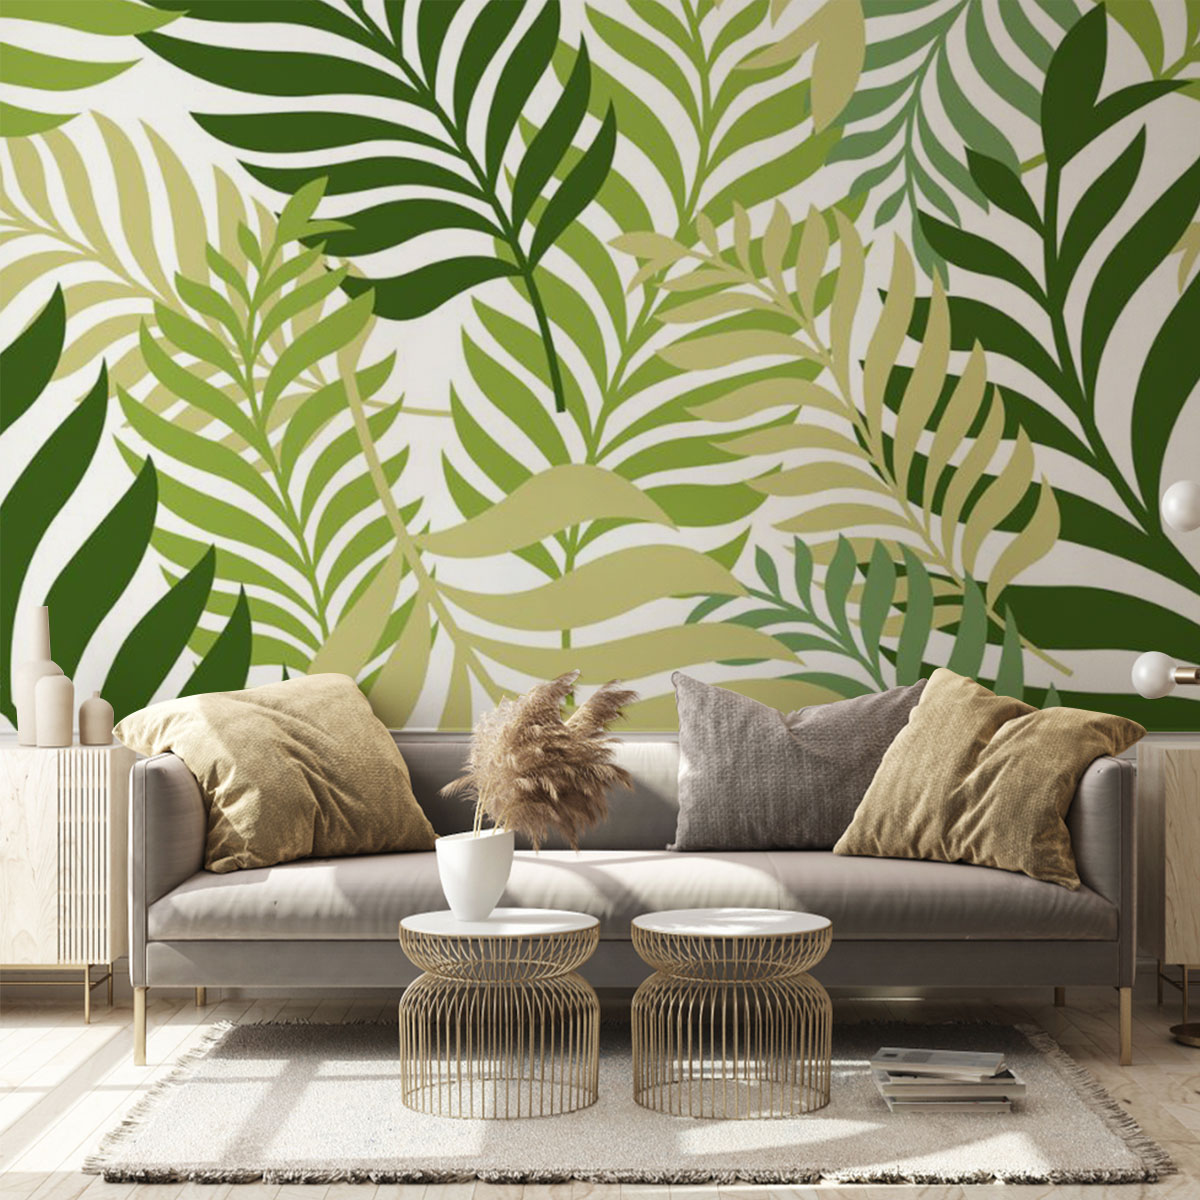 Green Palm Tree Leaves Wall Mural